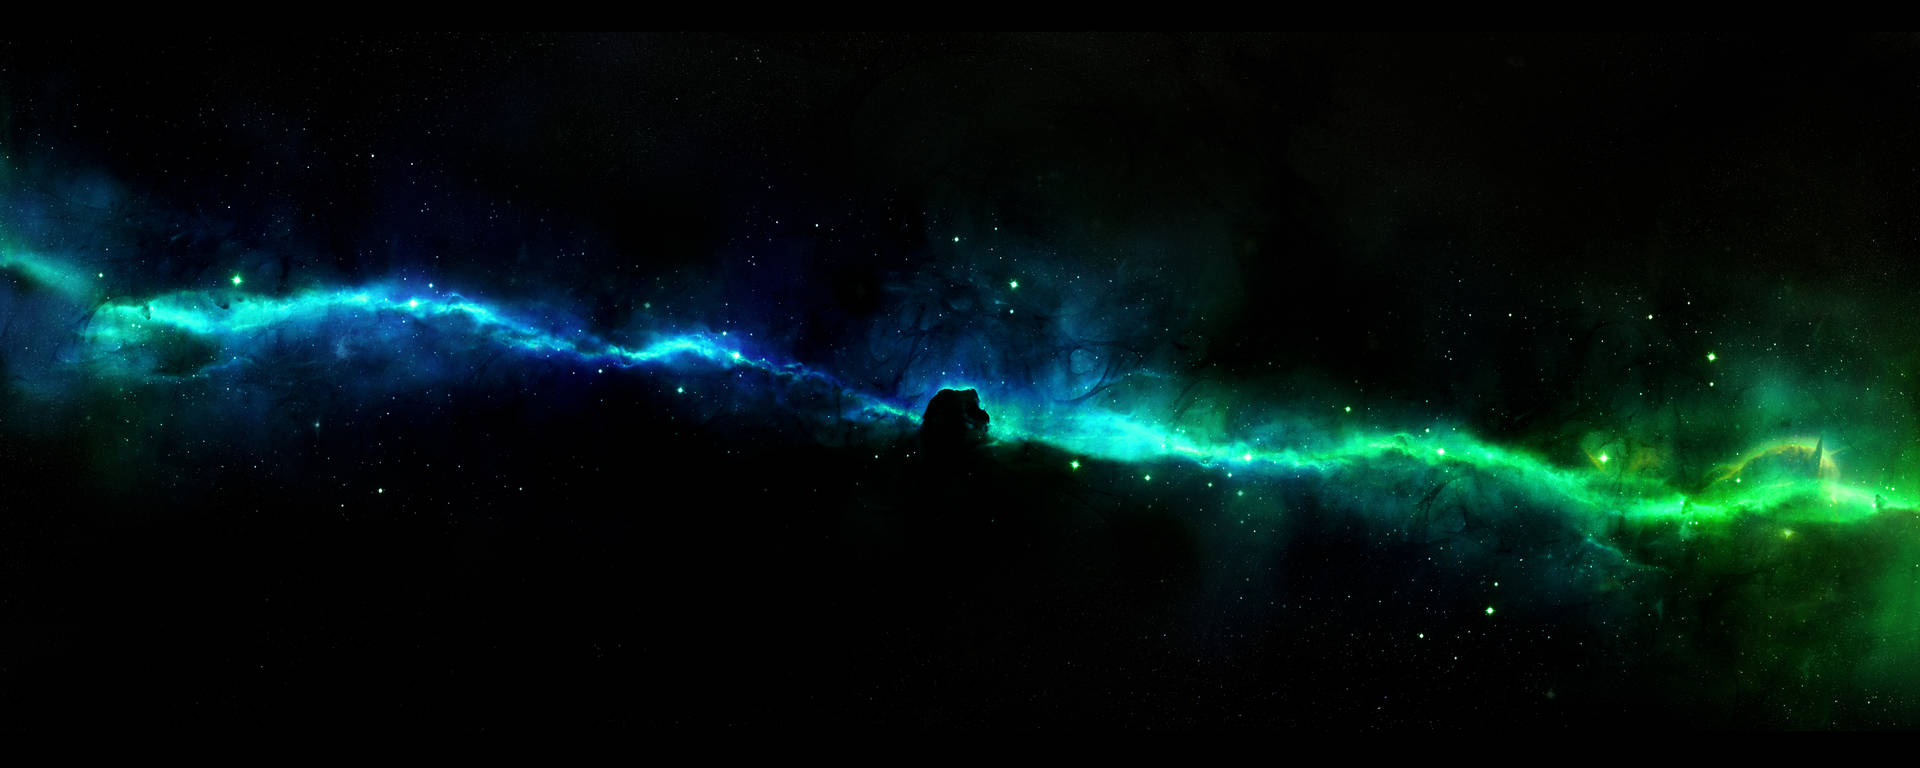 "The mysterious beauty of the nebula glows in the dark". Wallpaper